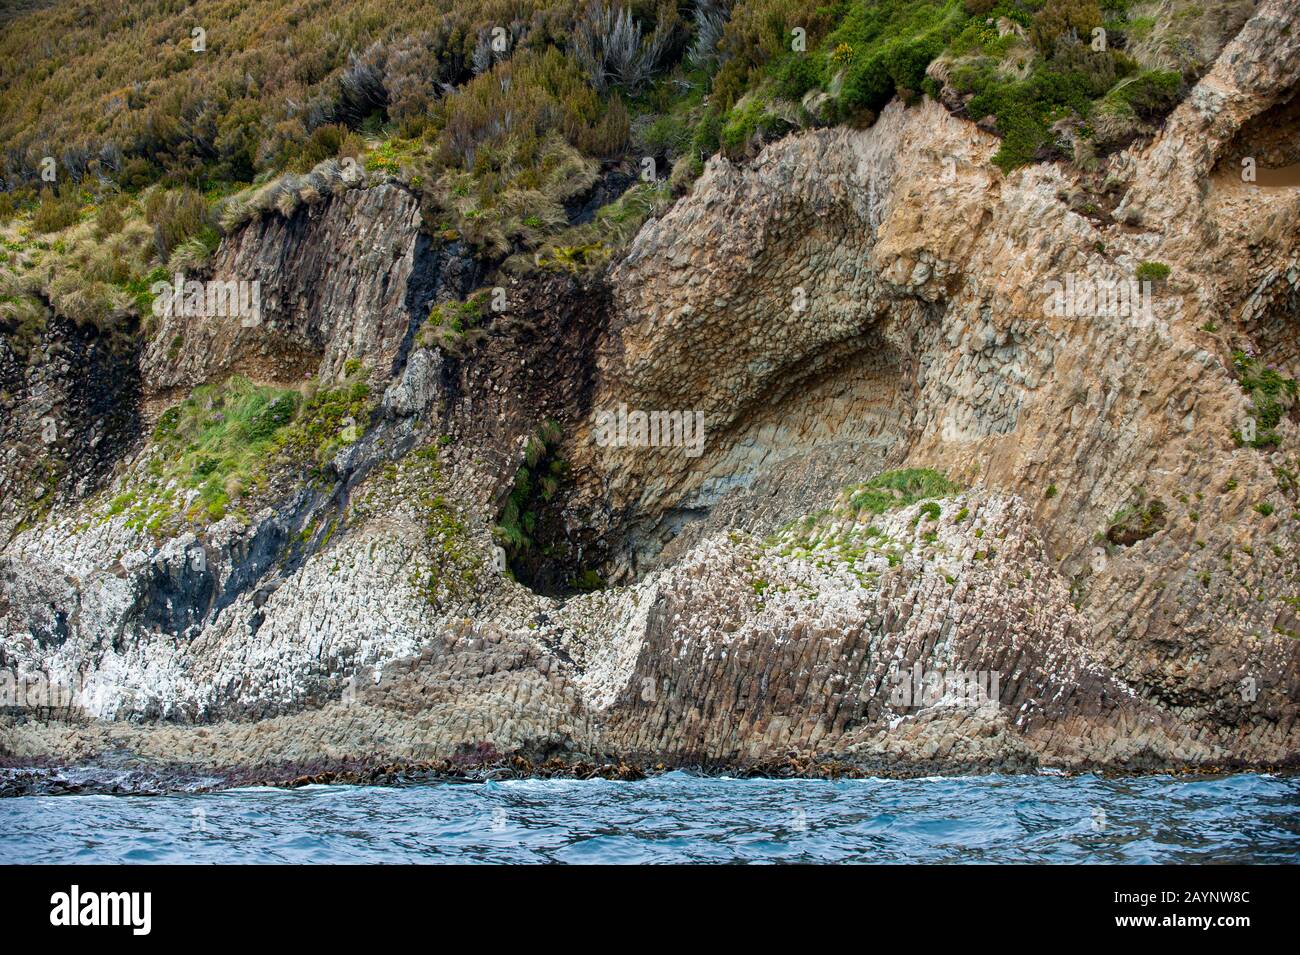 View of volcanic rockformations along the coastline of Campbell Island, a sub-Antarctic Island in the Campbell Island group, New Zealand. Stock Photo